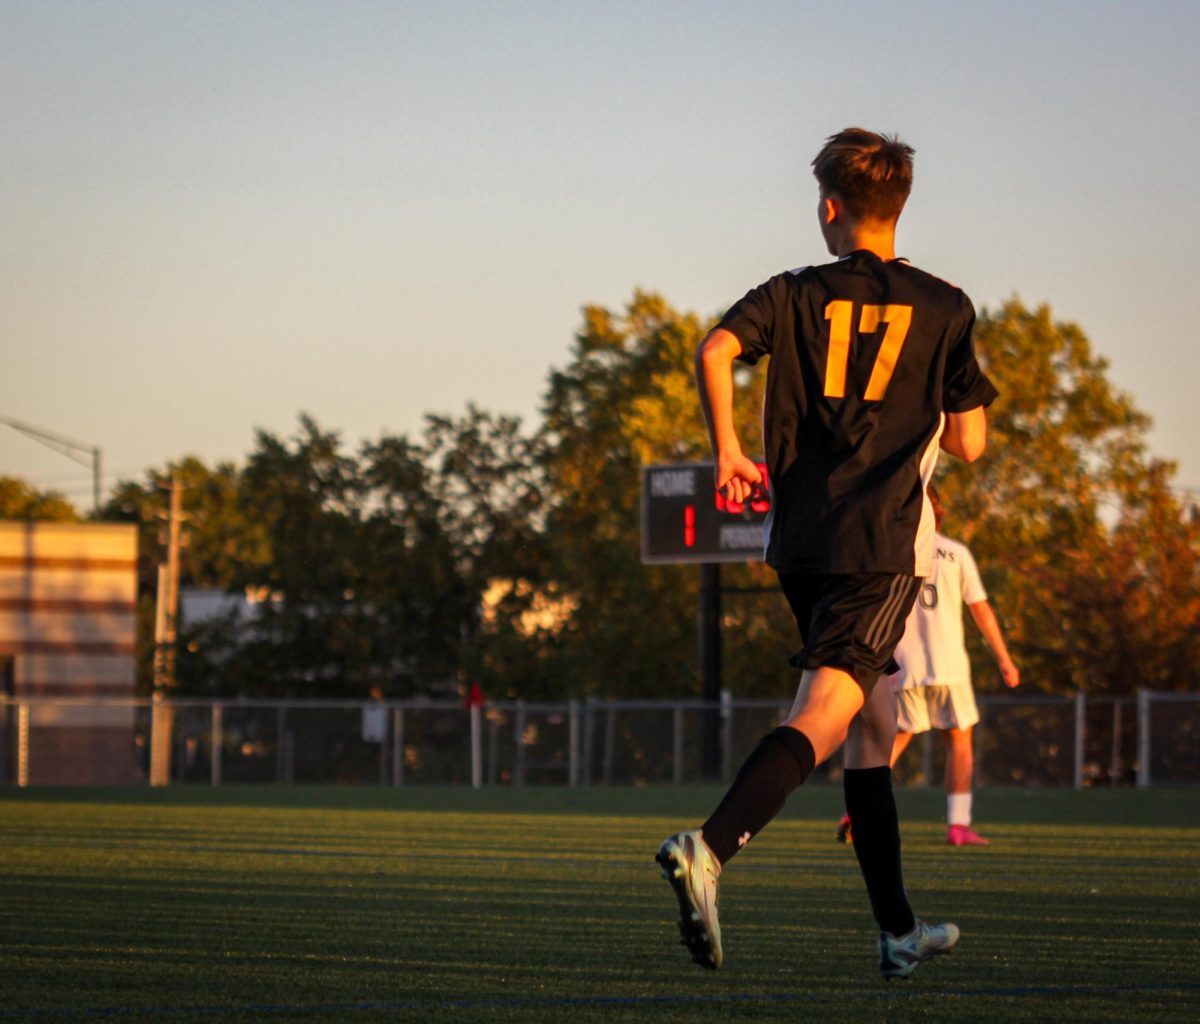 Junior%2C+Jordan+Christensen%2C+playing+in+the+JV+Soccer+Game+while+the+sun+sets+behind+him.+19%2F10%2F2023%0A